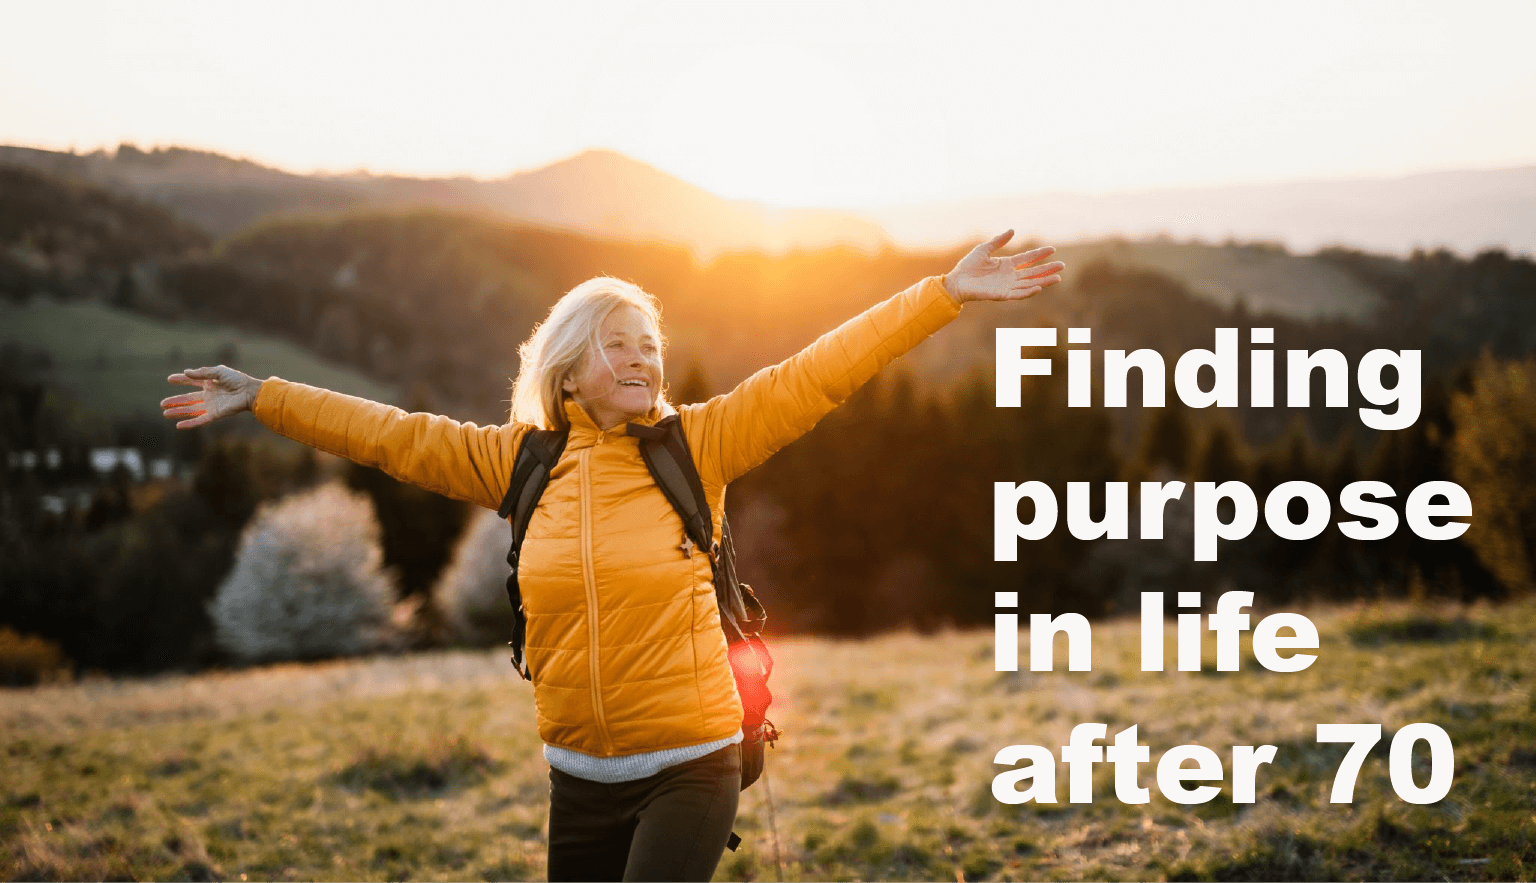 Finding purpose in life after 70